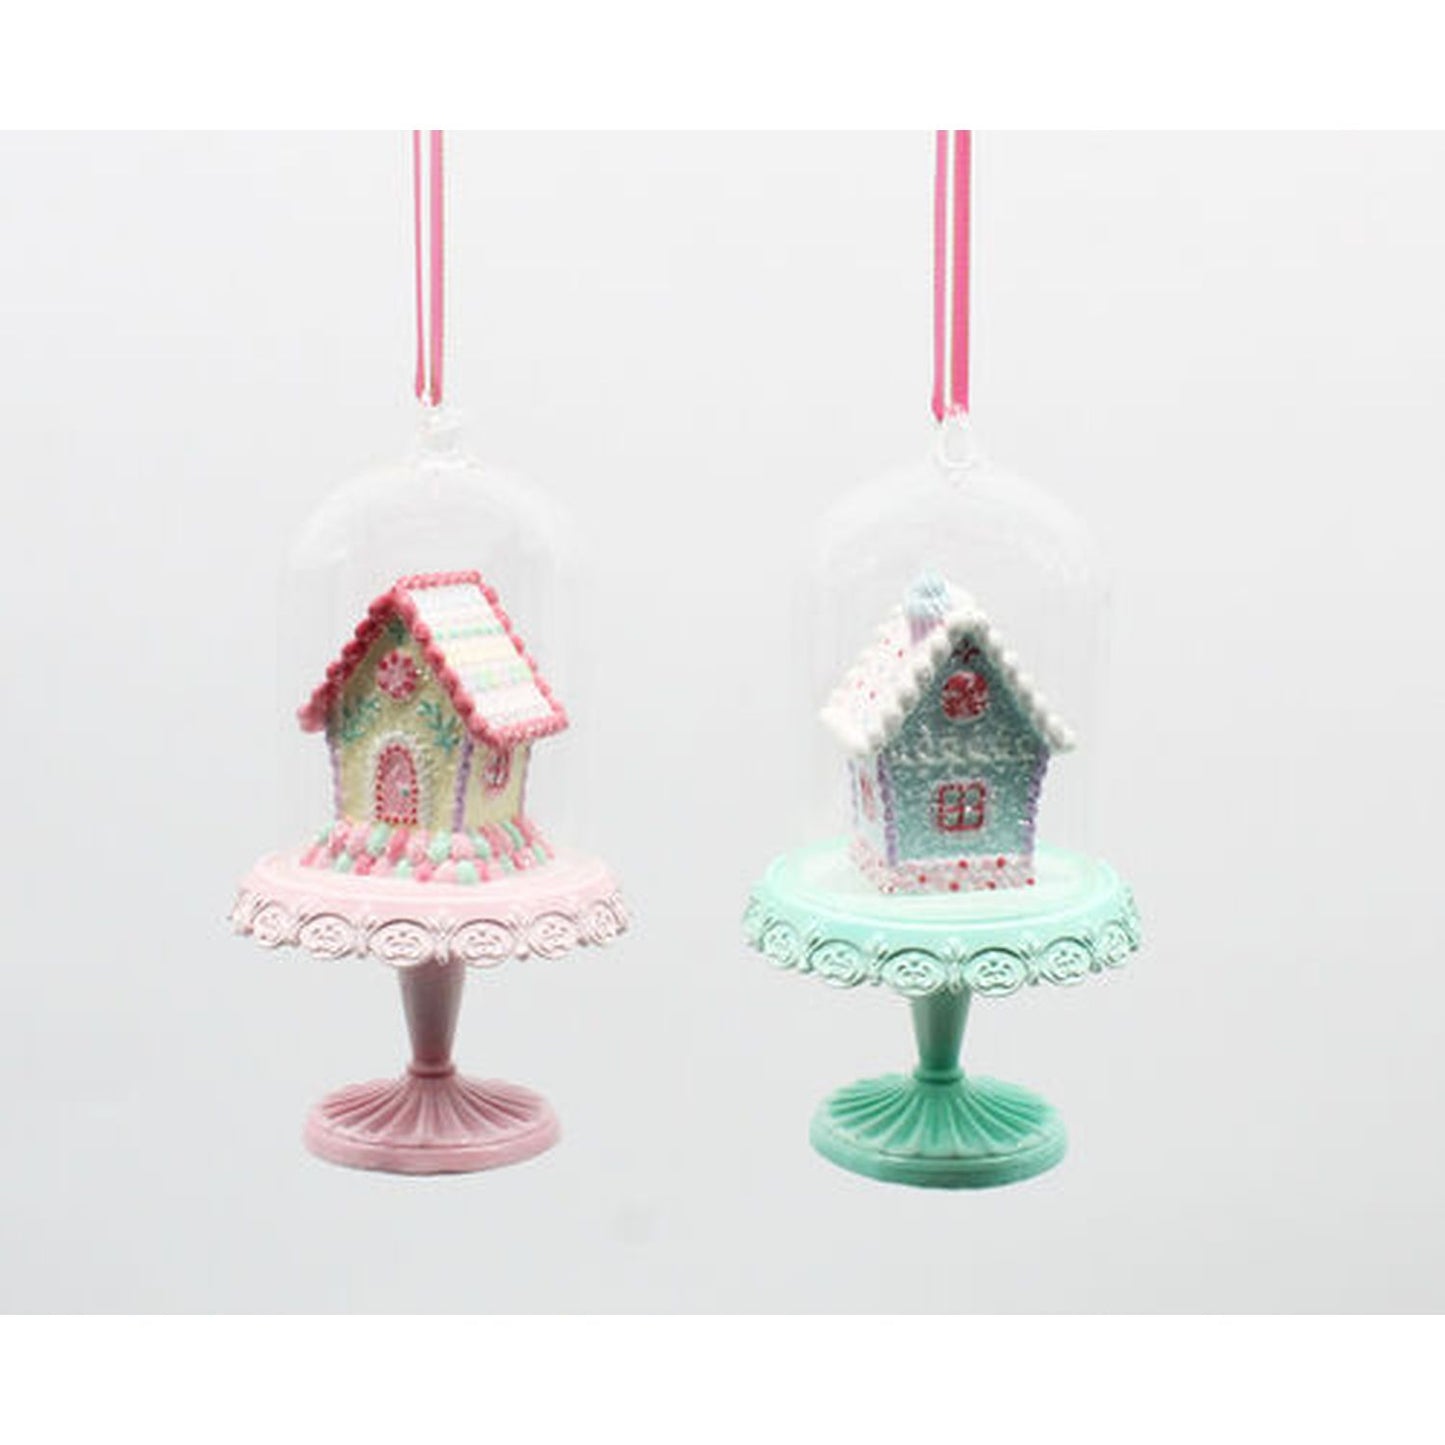 North Pole Sweet Shoppe Set Of 2 Assortment Candy House Ornaments